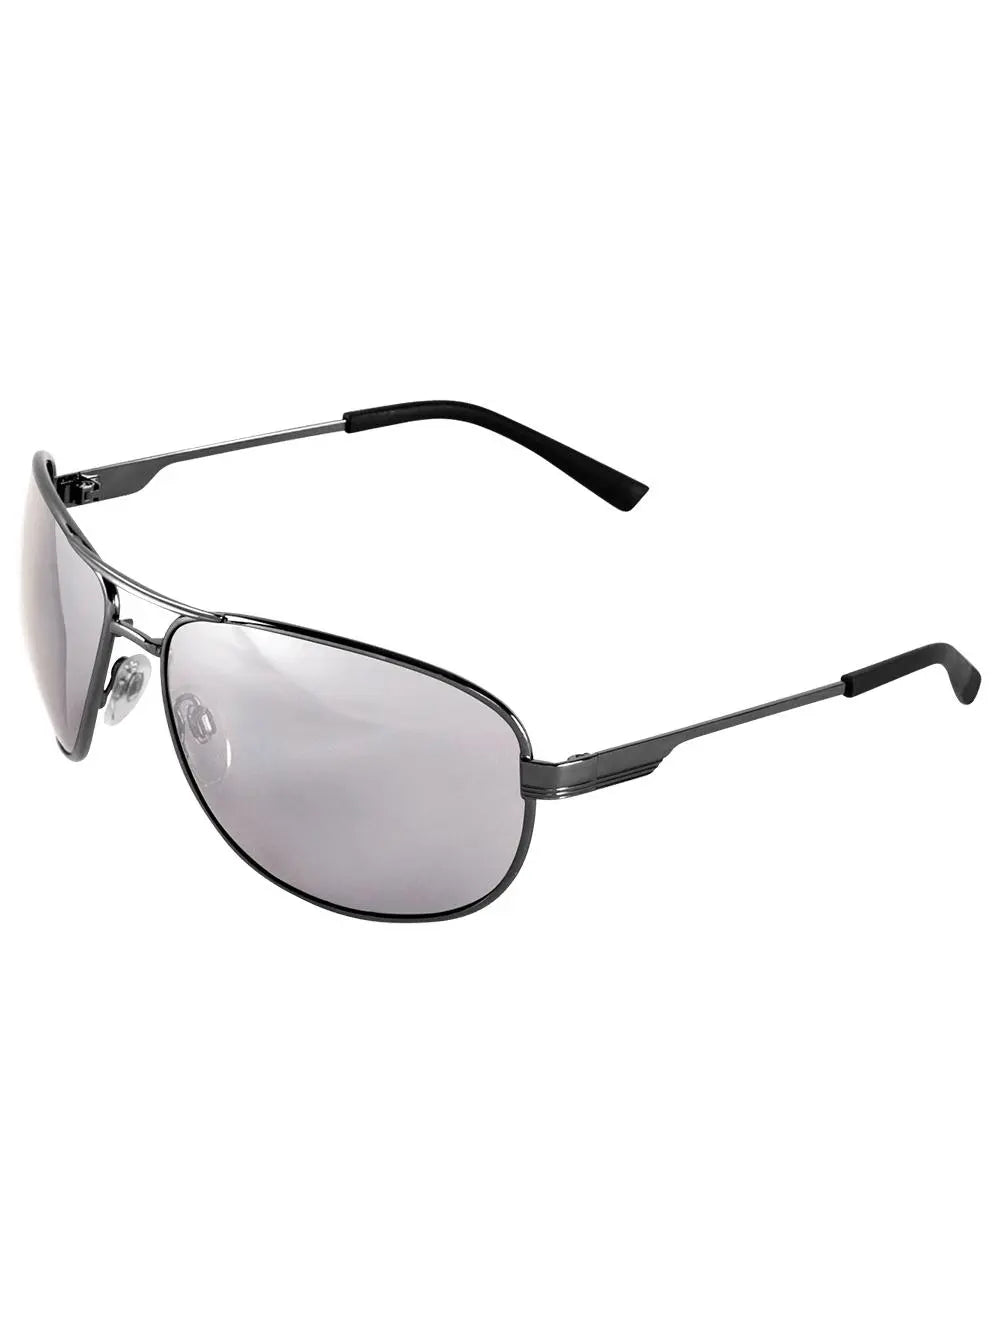 BULLHEAD SAFETY - Acero Silver Mirror Lens Safety Glasses, Gunmetal - Becker Safety and Supply